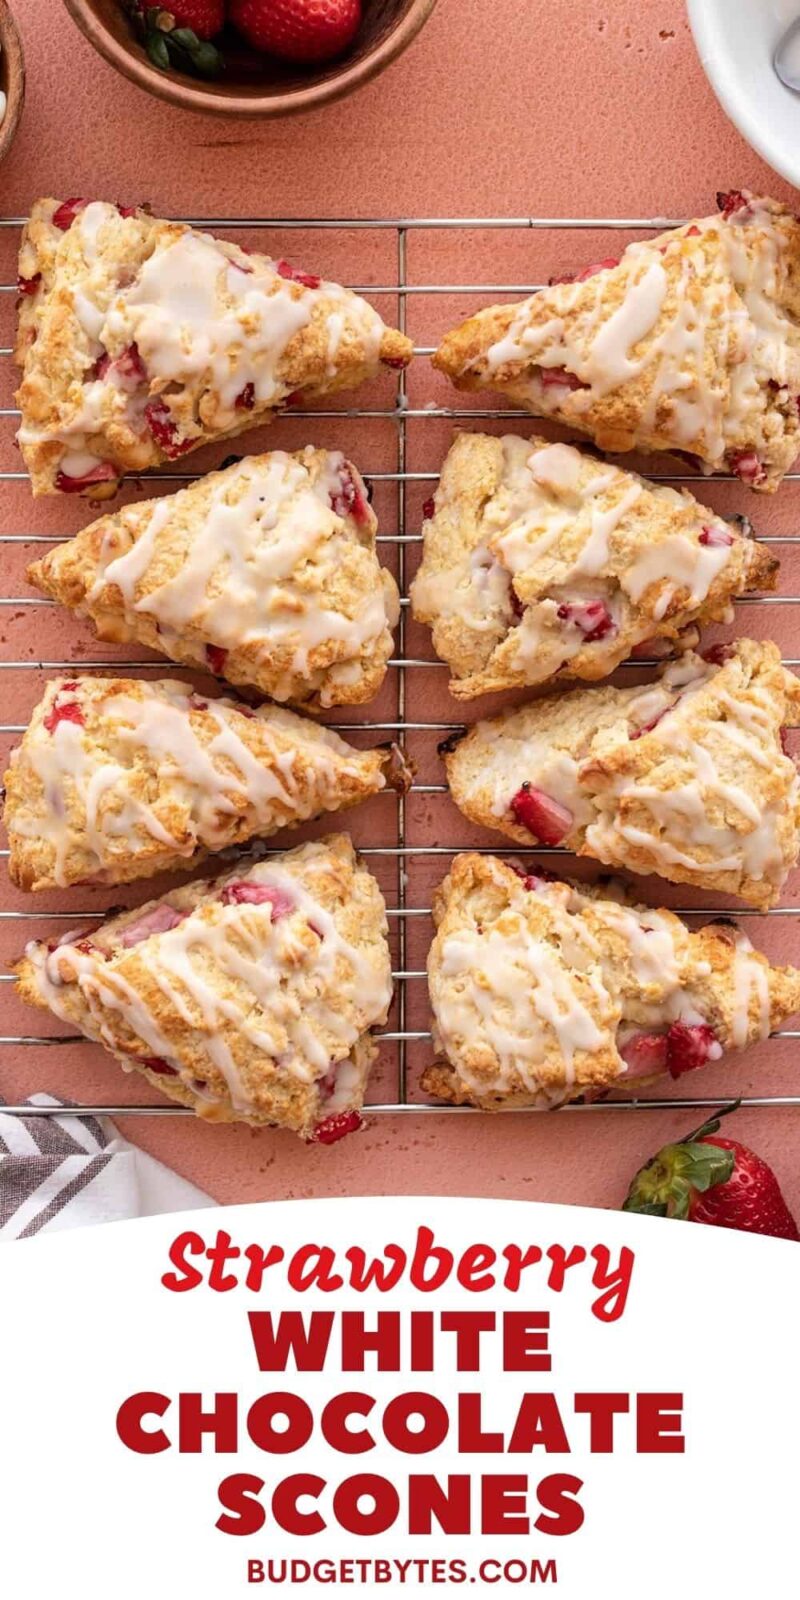 strawberry scones on a wire cooling rack